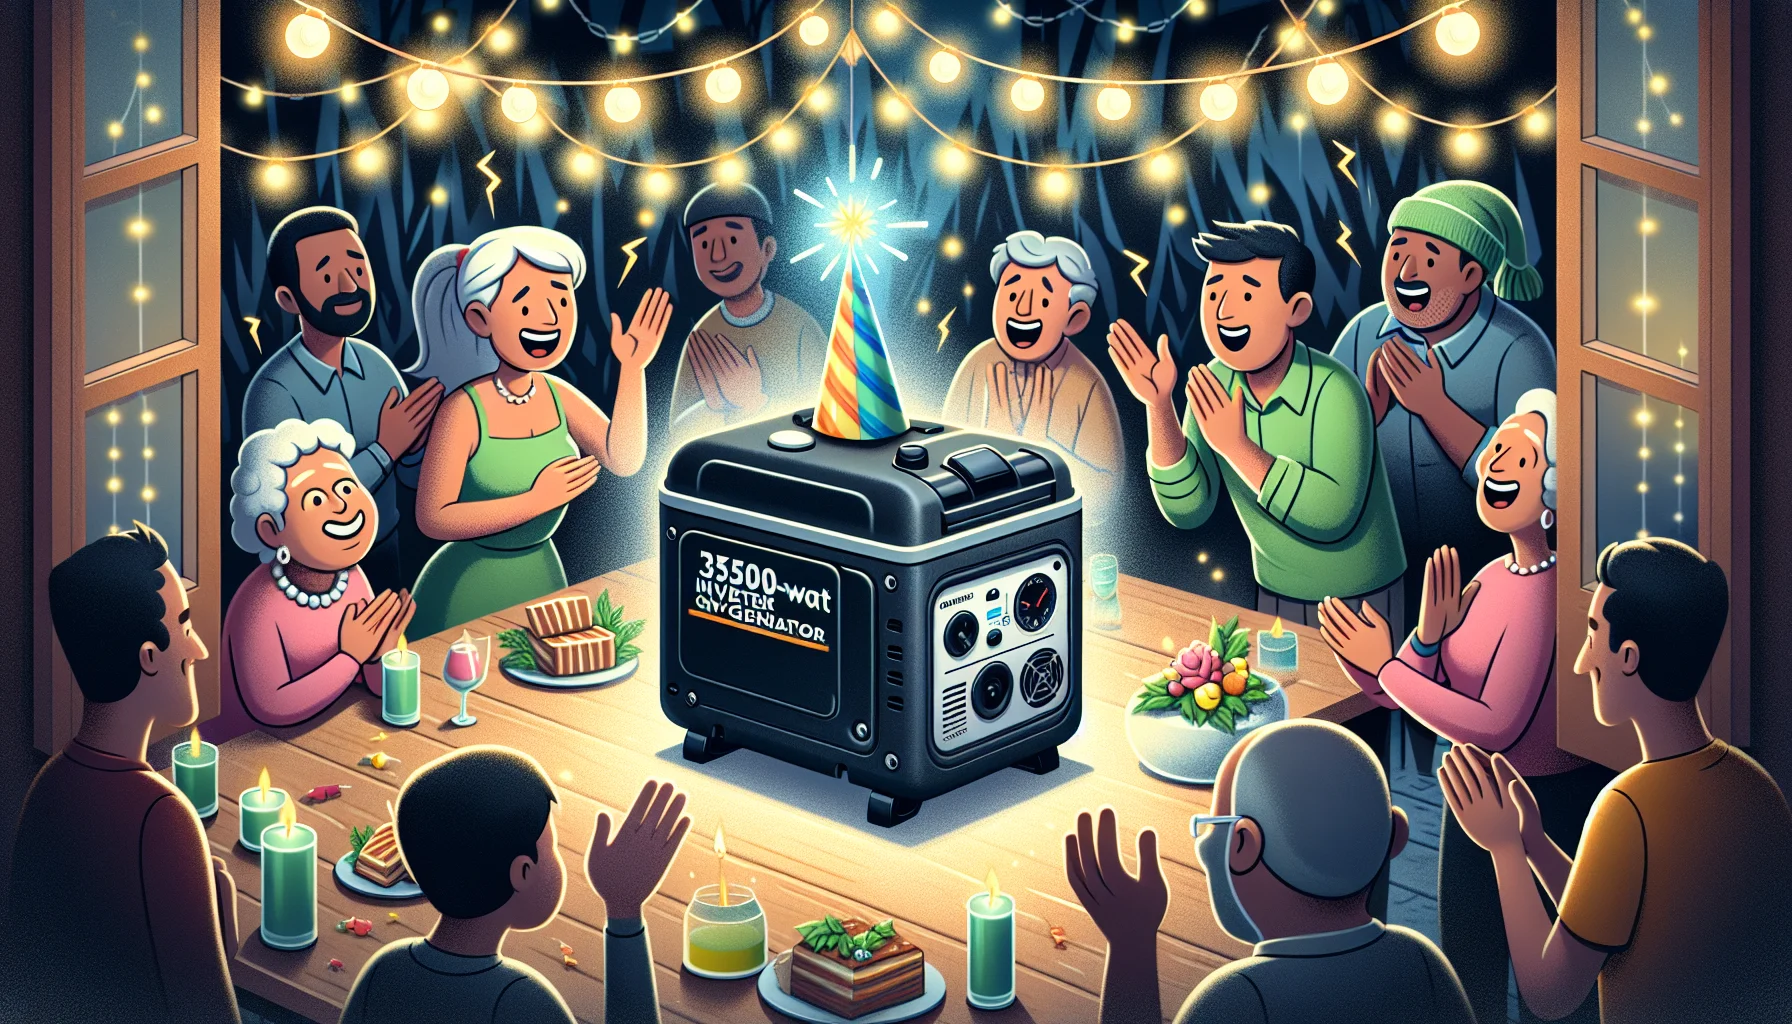 Create a whimsical scene featuring a 3500-watt inverter generator in the center of attention. It's wearing a party hat and surrounded by people of different genders and descents - a Caucasian man and a Hispanic woman fascinated by the generator, a Black elderly lady applauding it with a smile, and a young Middle-Eastern boy in awe. They are throwing a party in an outdoor setting, with fairy lights dim due to low power. Suddenly, the generator springs to life emitting bright, colorful sparks that light up the bulbs, causing subsequent laughter and excitement among the people.